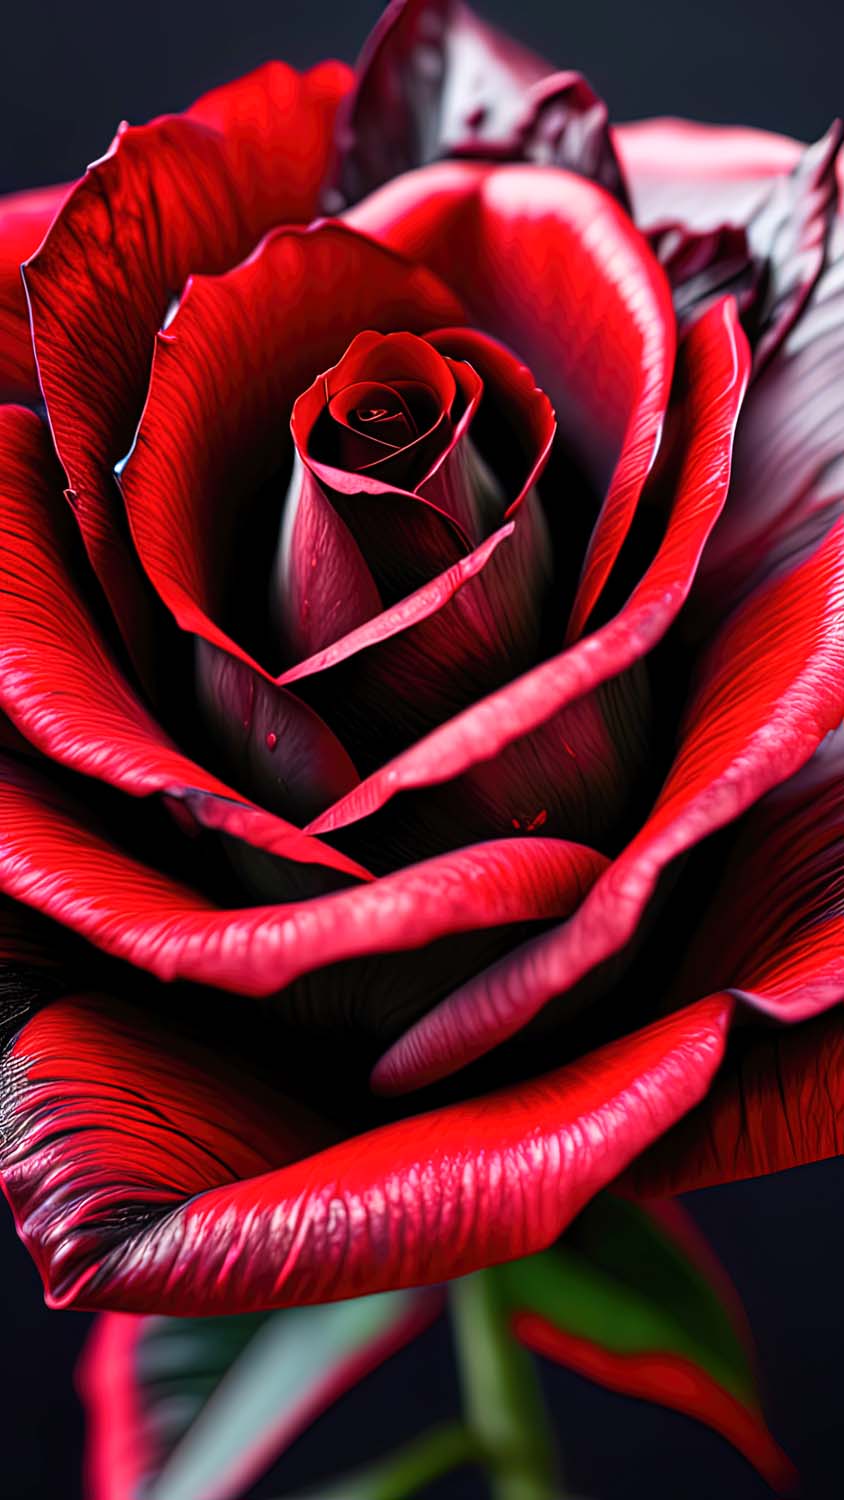 Red Rose Love IPhone Wallpaper HD - IPhone Wallpapers : iPhone ...